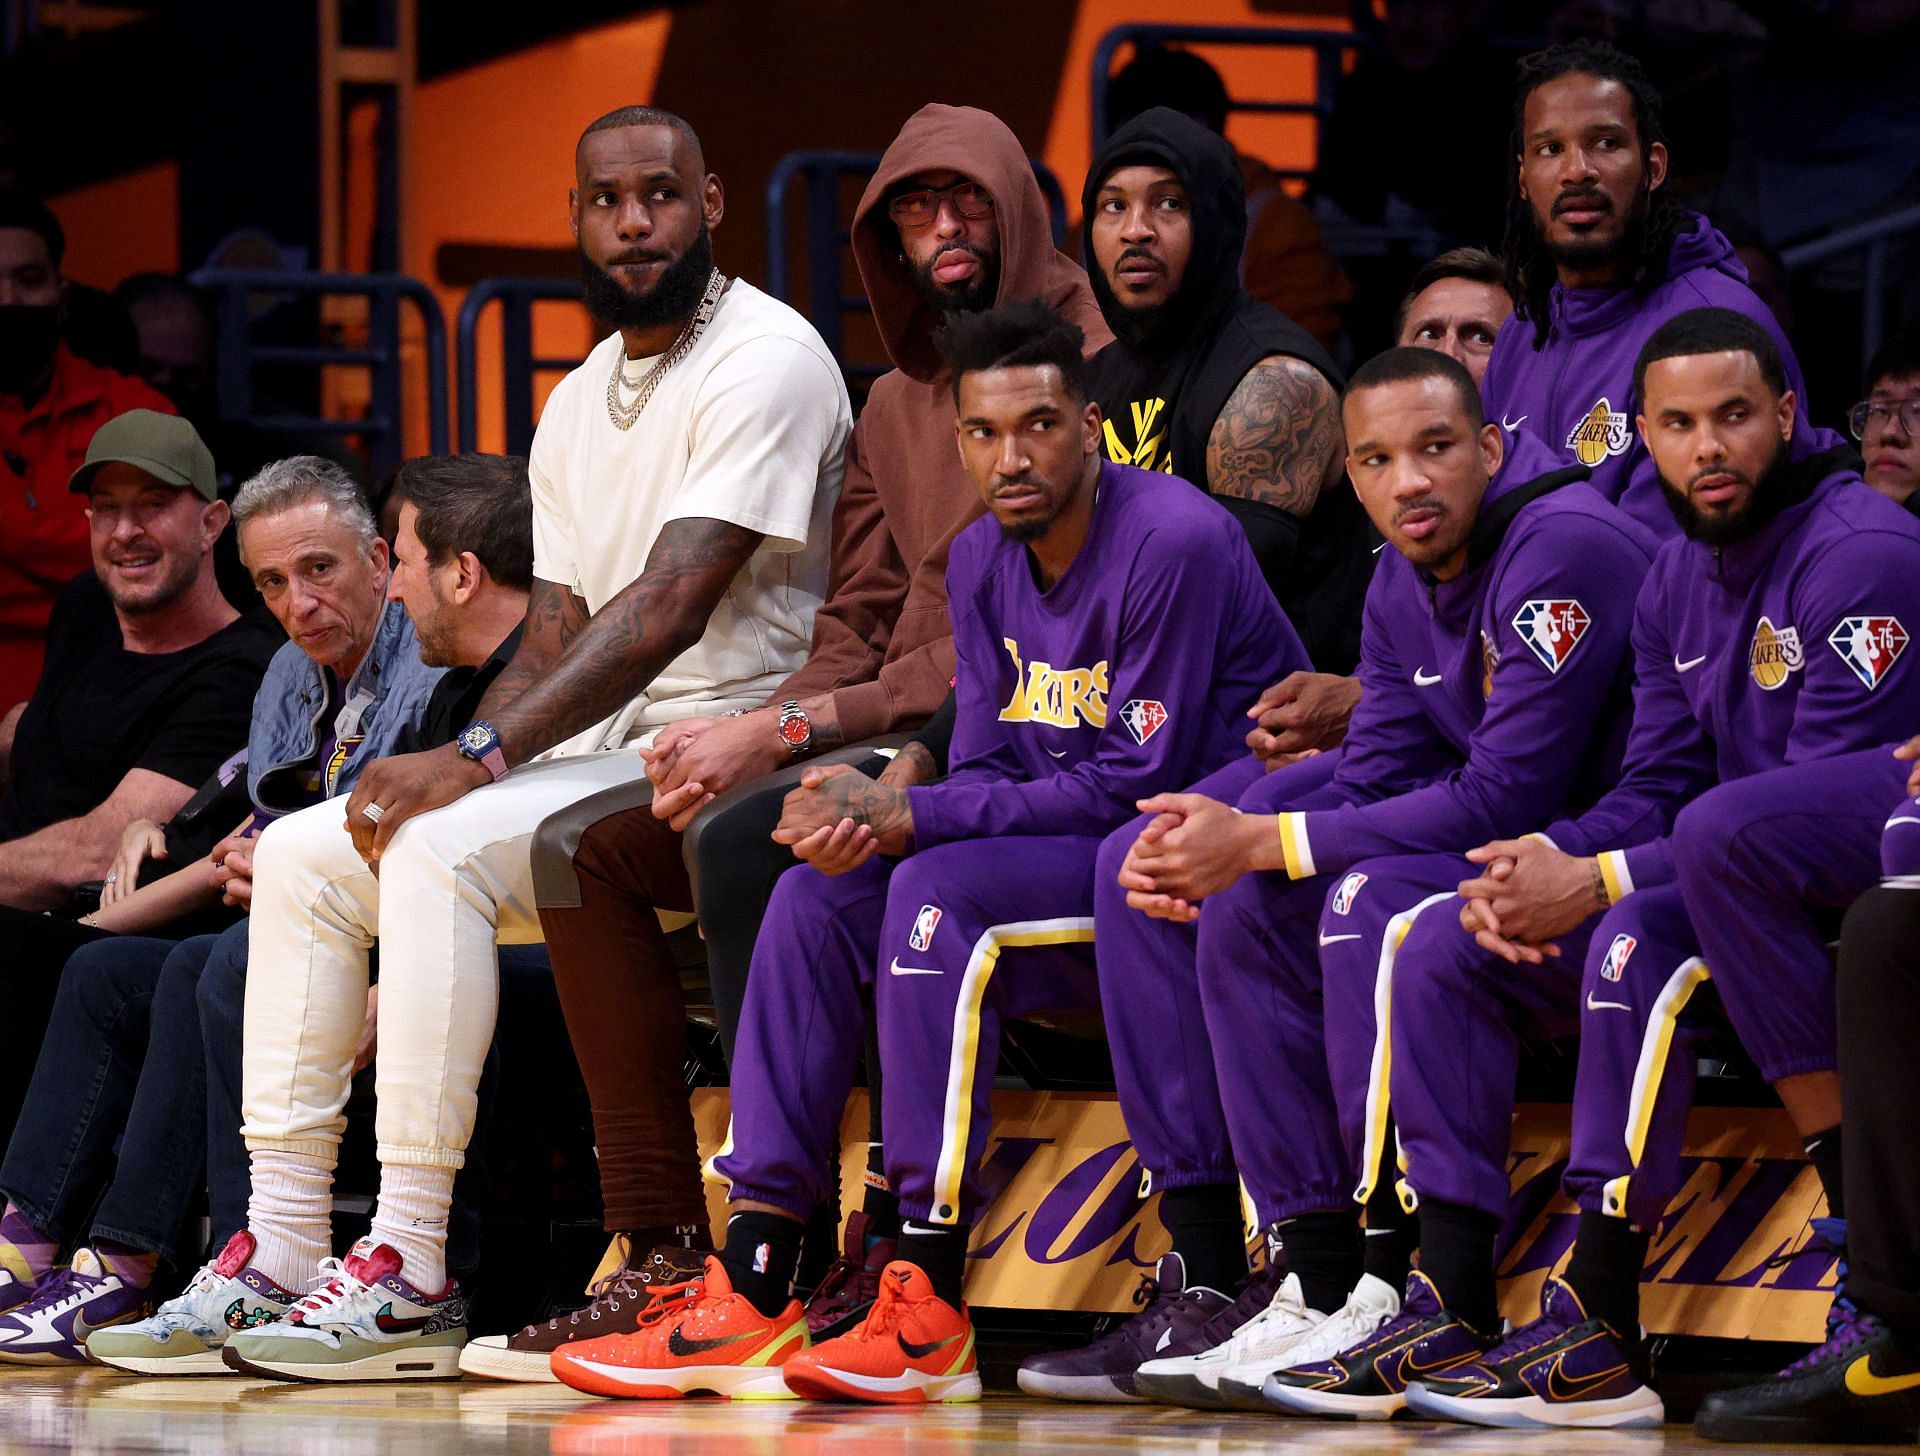 LeBron James #6, Anthony Davis #3 and Carmelo Anthony #7 of the Los Angeles Lakers watch play down court